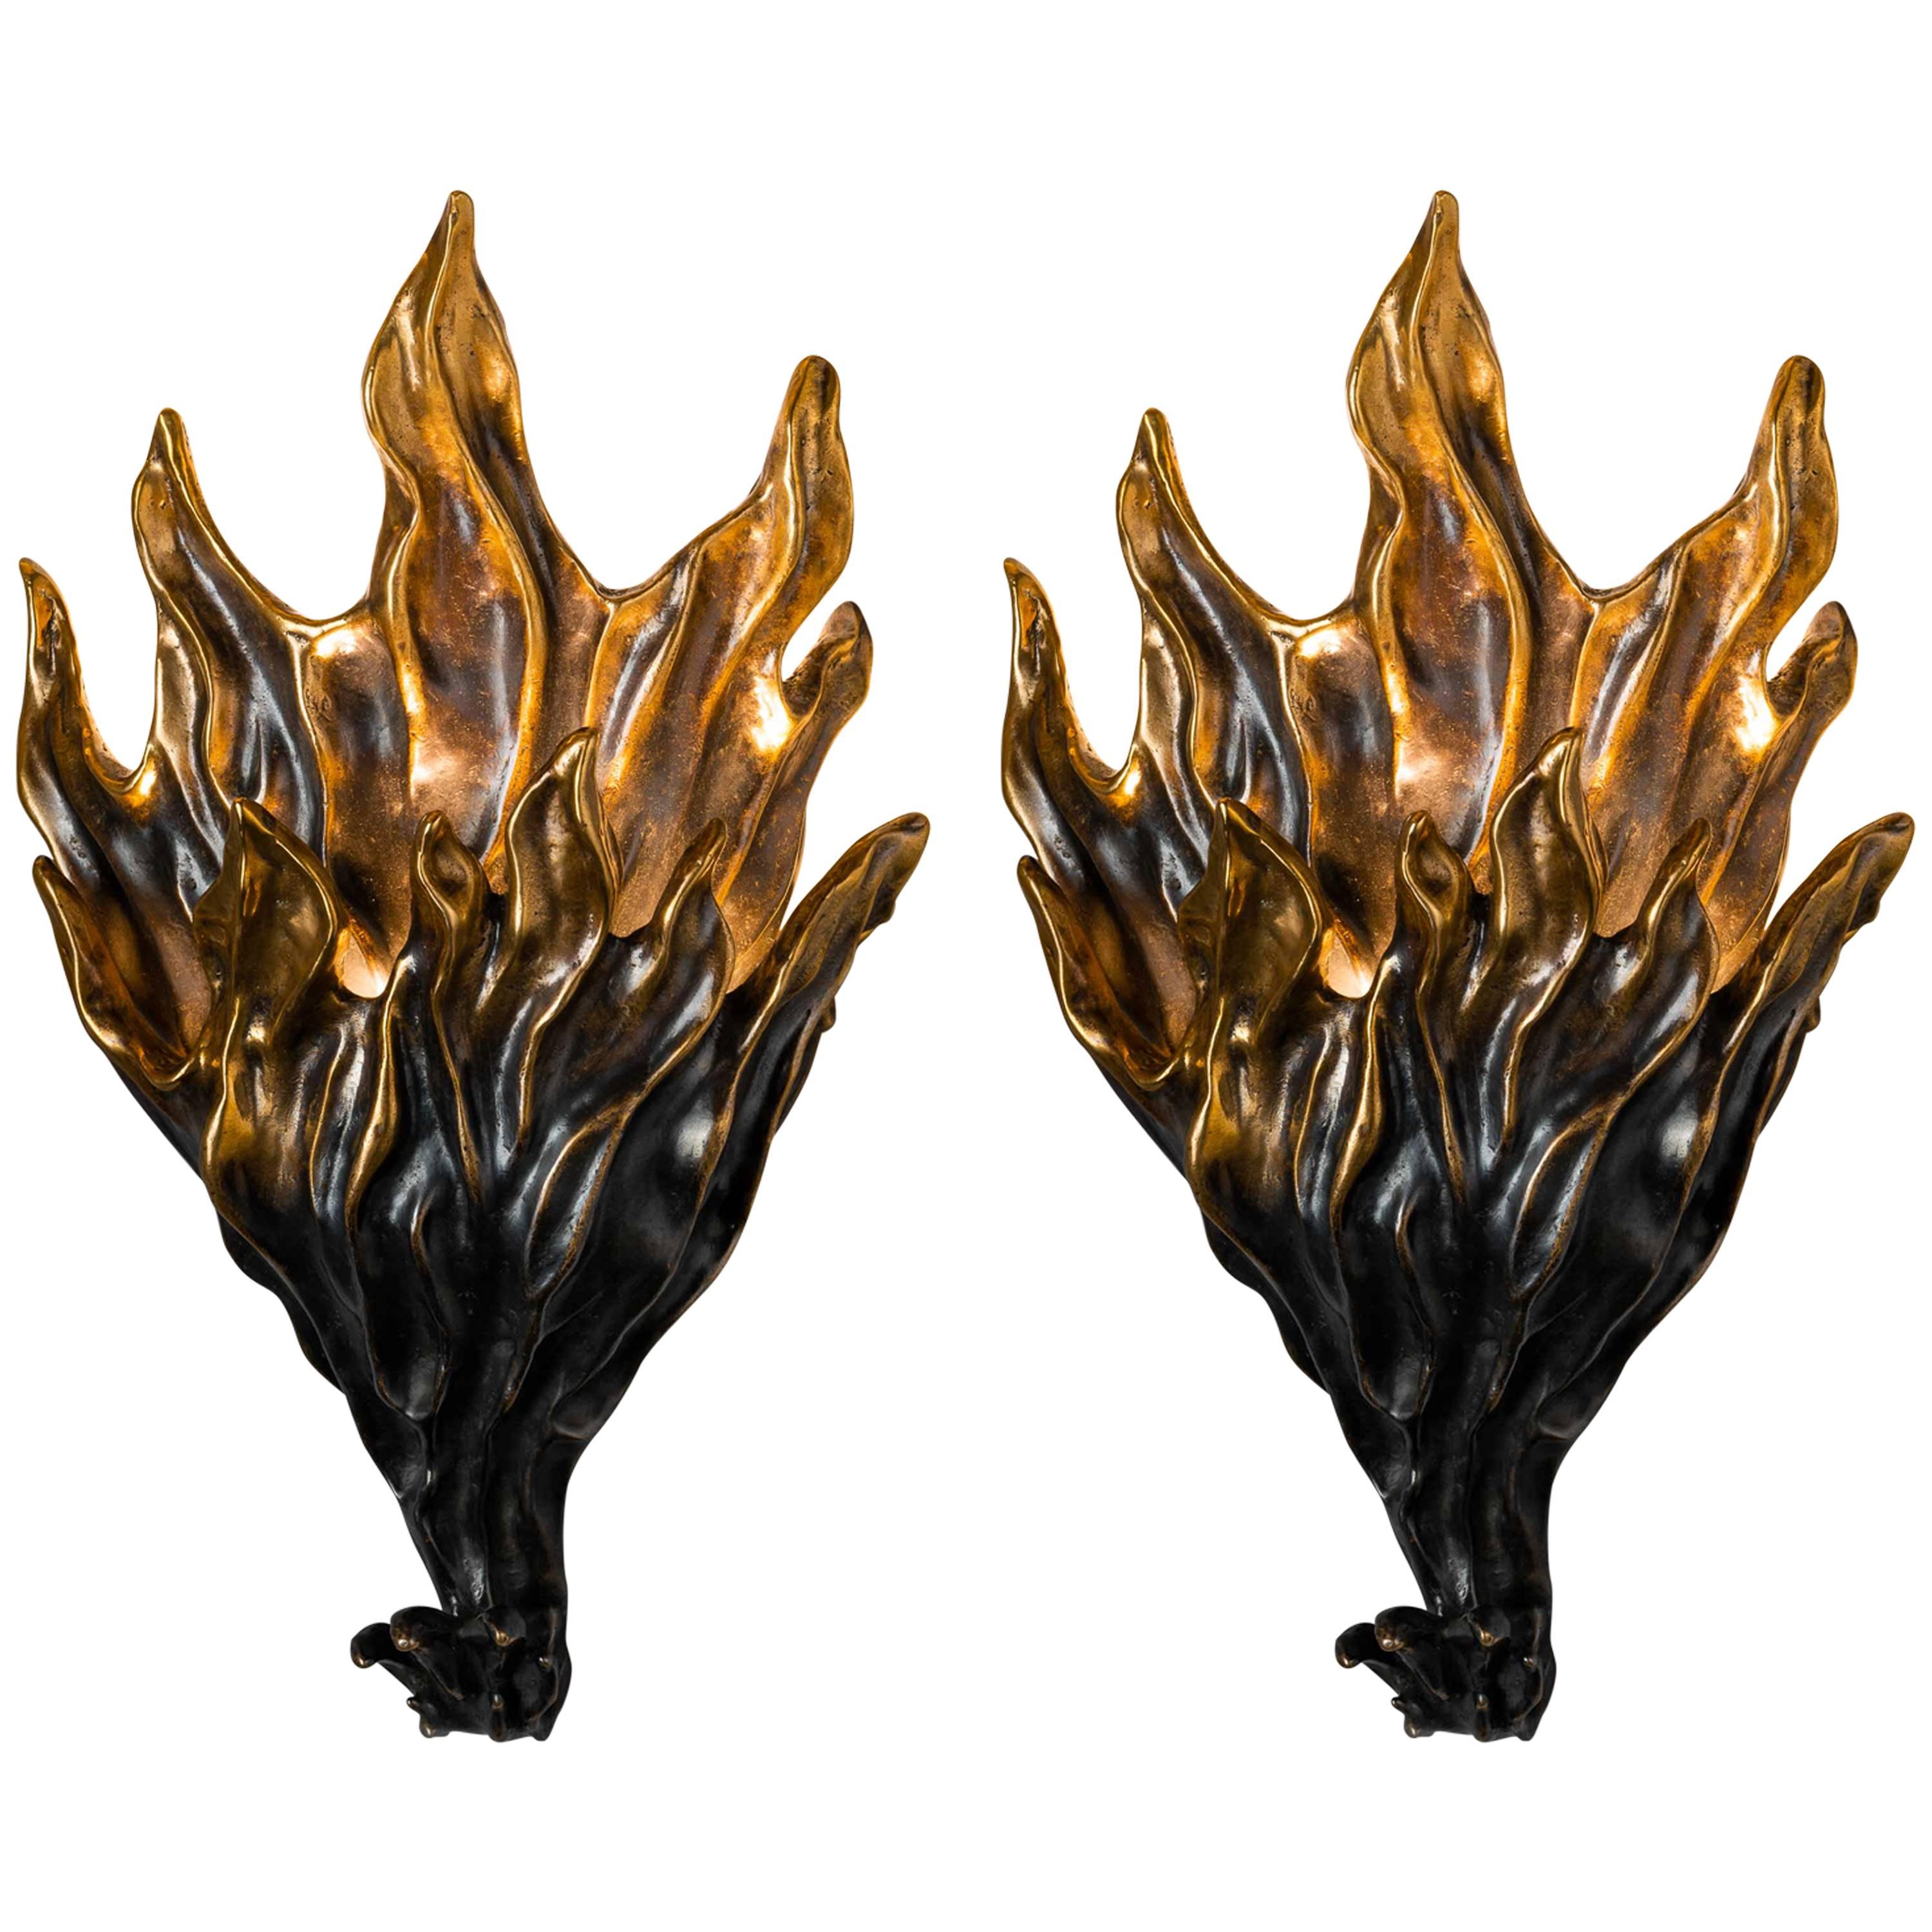 Mattia Bonetti Pair of Sconces 'Fires I' and 'Fires II' For Sale